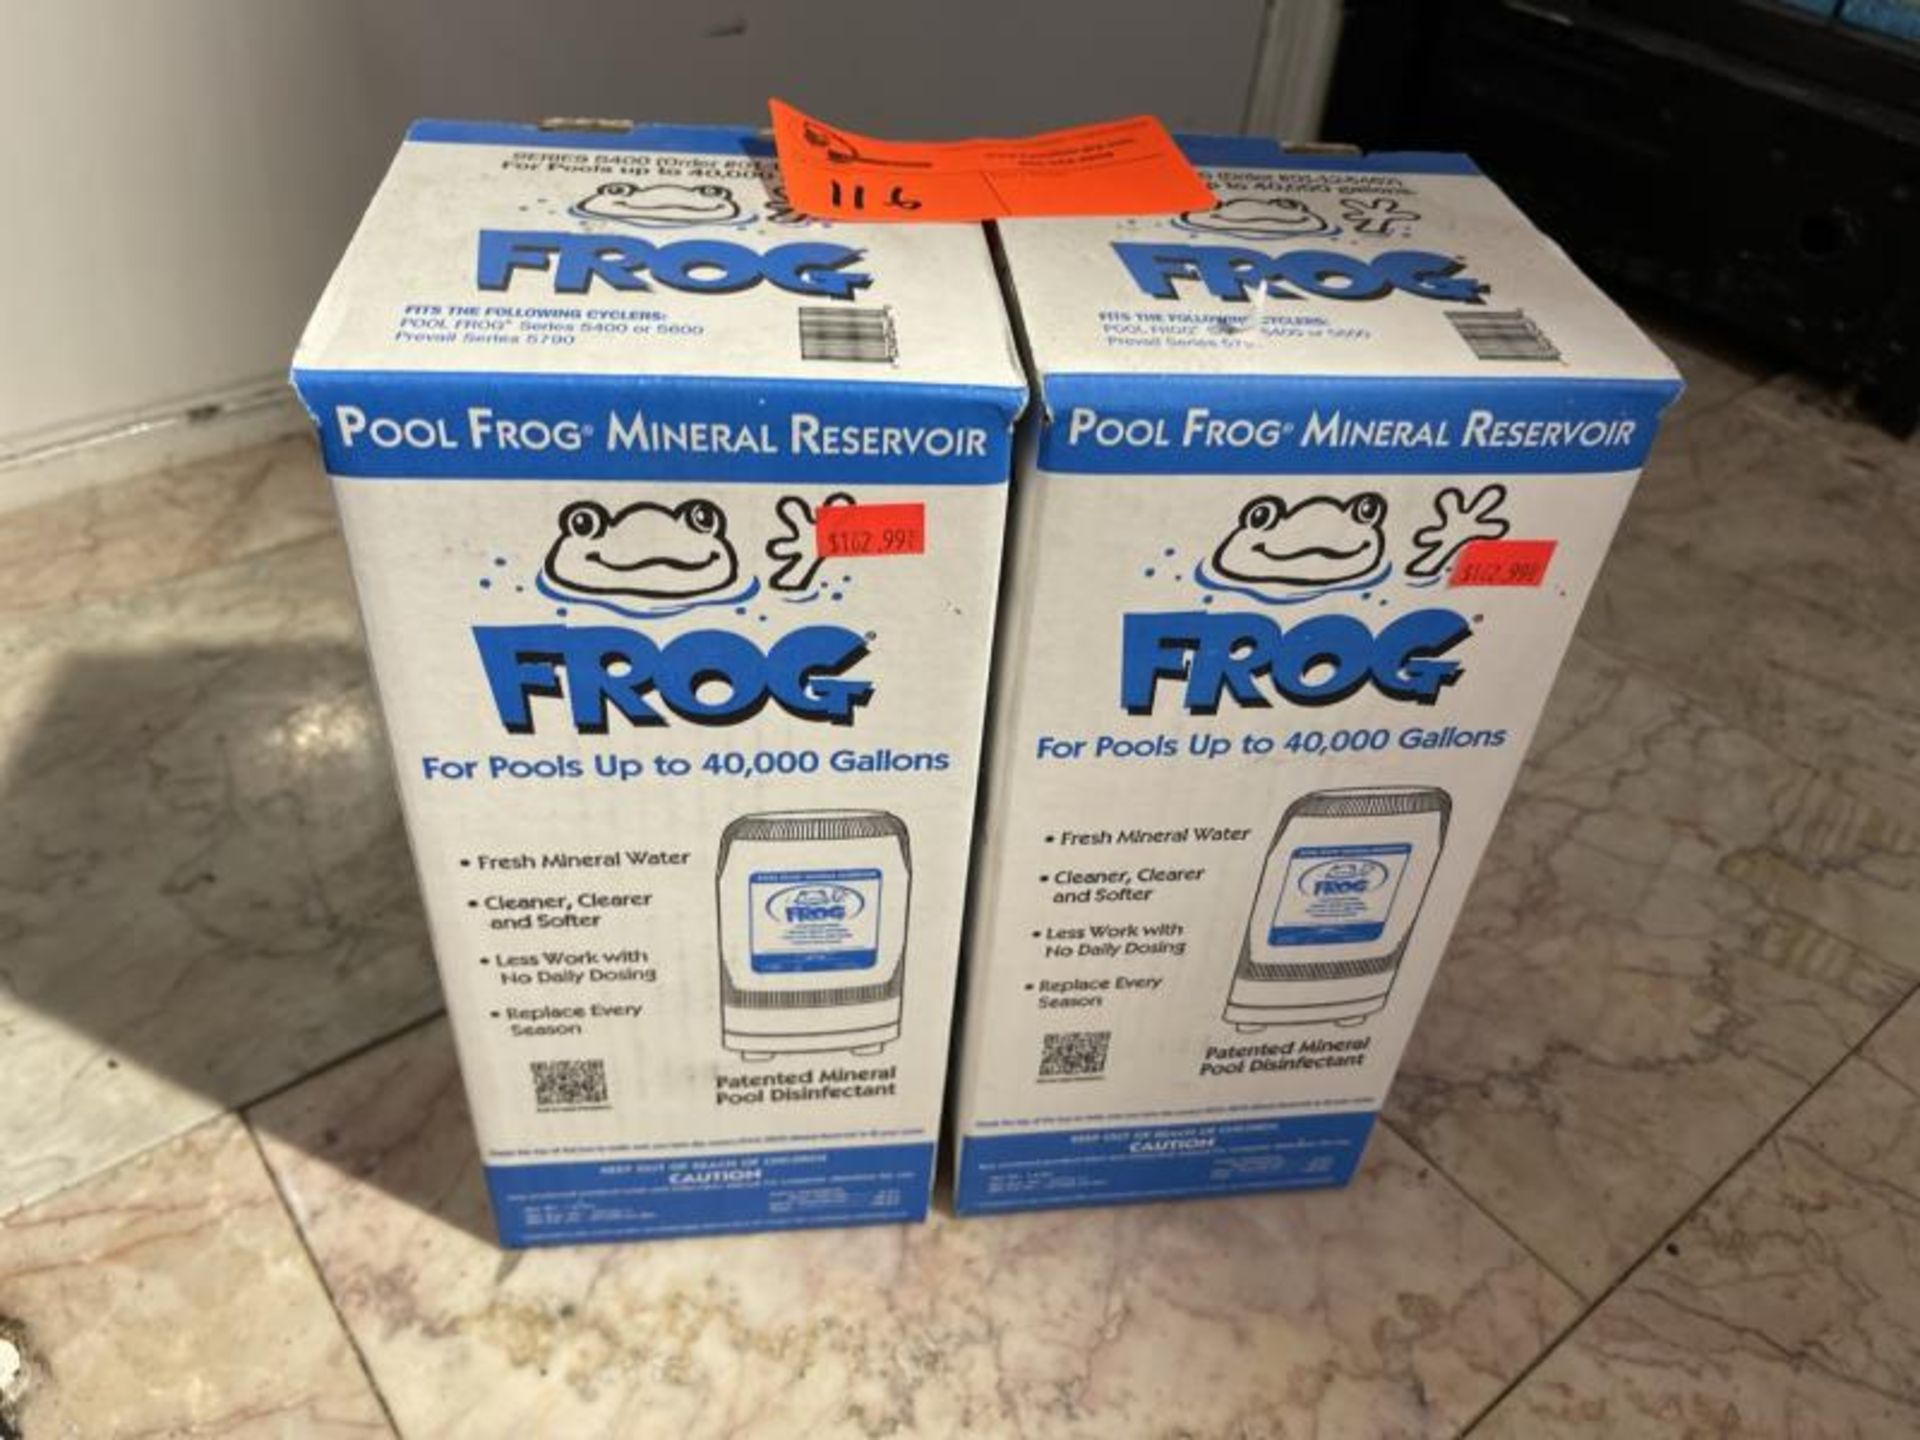 Lot of (2) Pool Frog mineral reservoir refills for pools up to 40,000 gallons, series 540